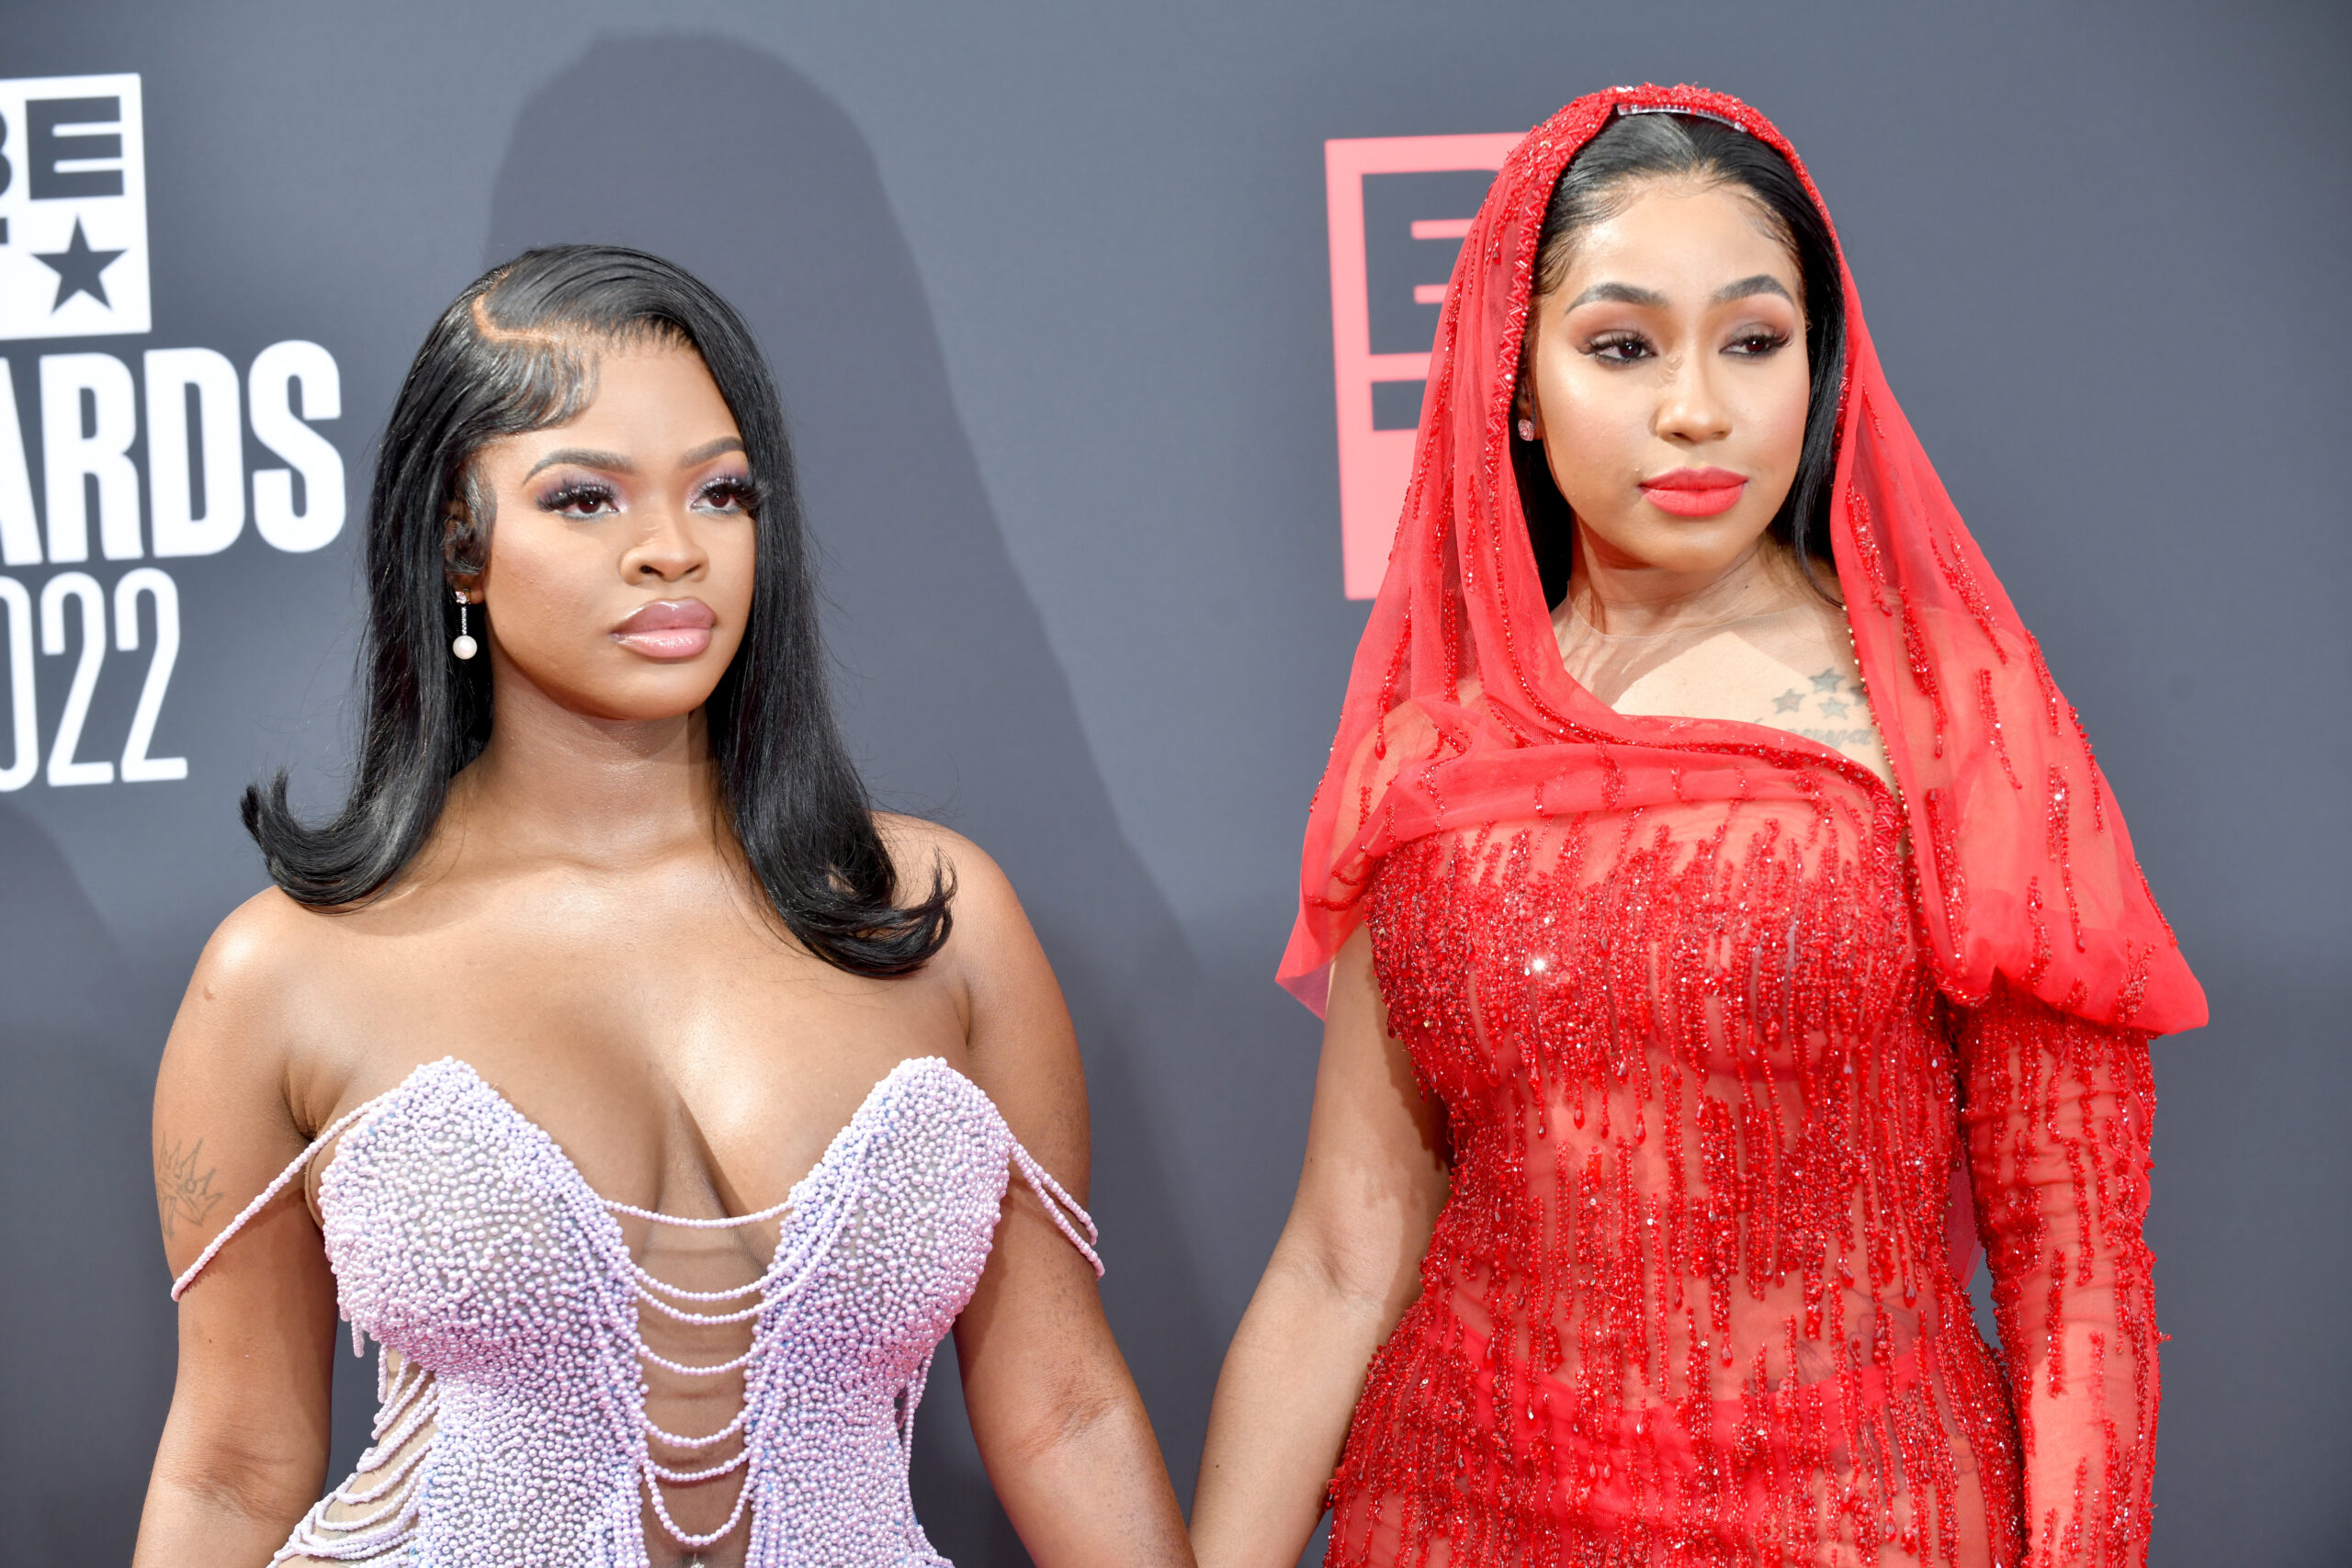 City Girls Focused On Elevated P***y Rap With New Album